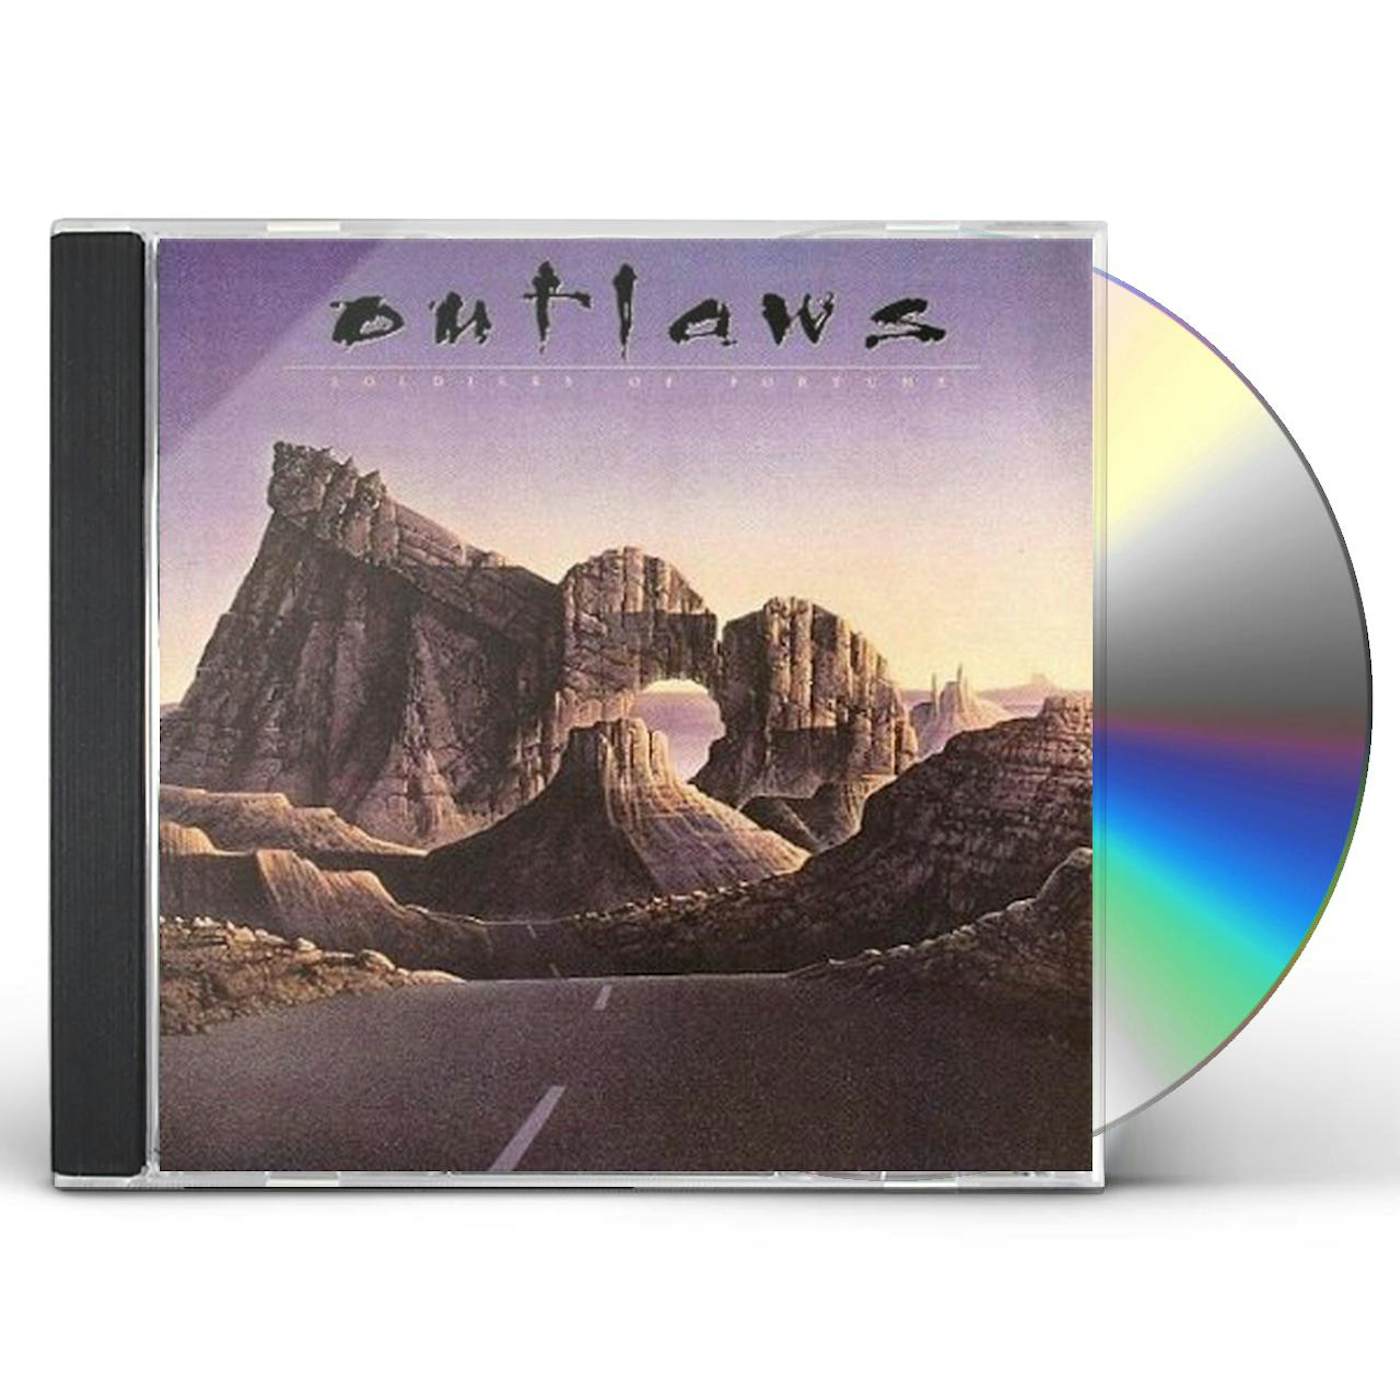 Outlaws SOLDIERS OF FORTUNE CD